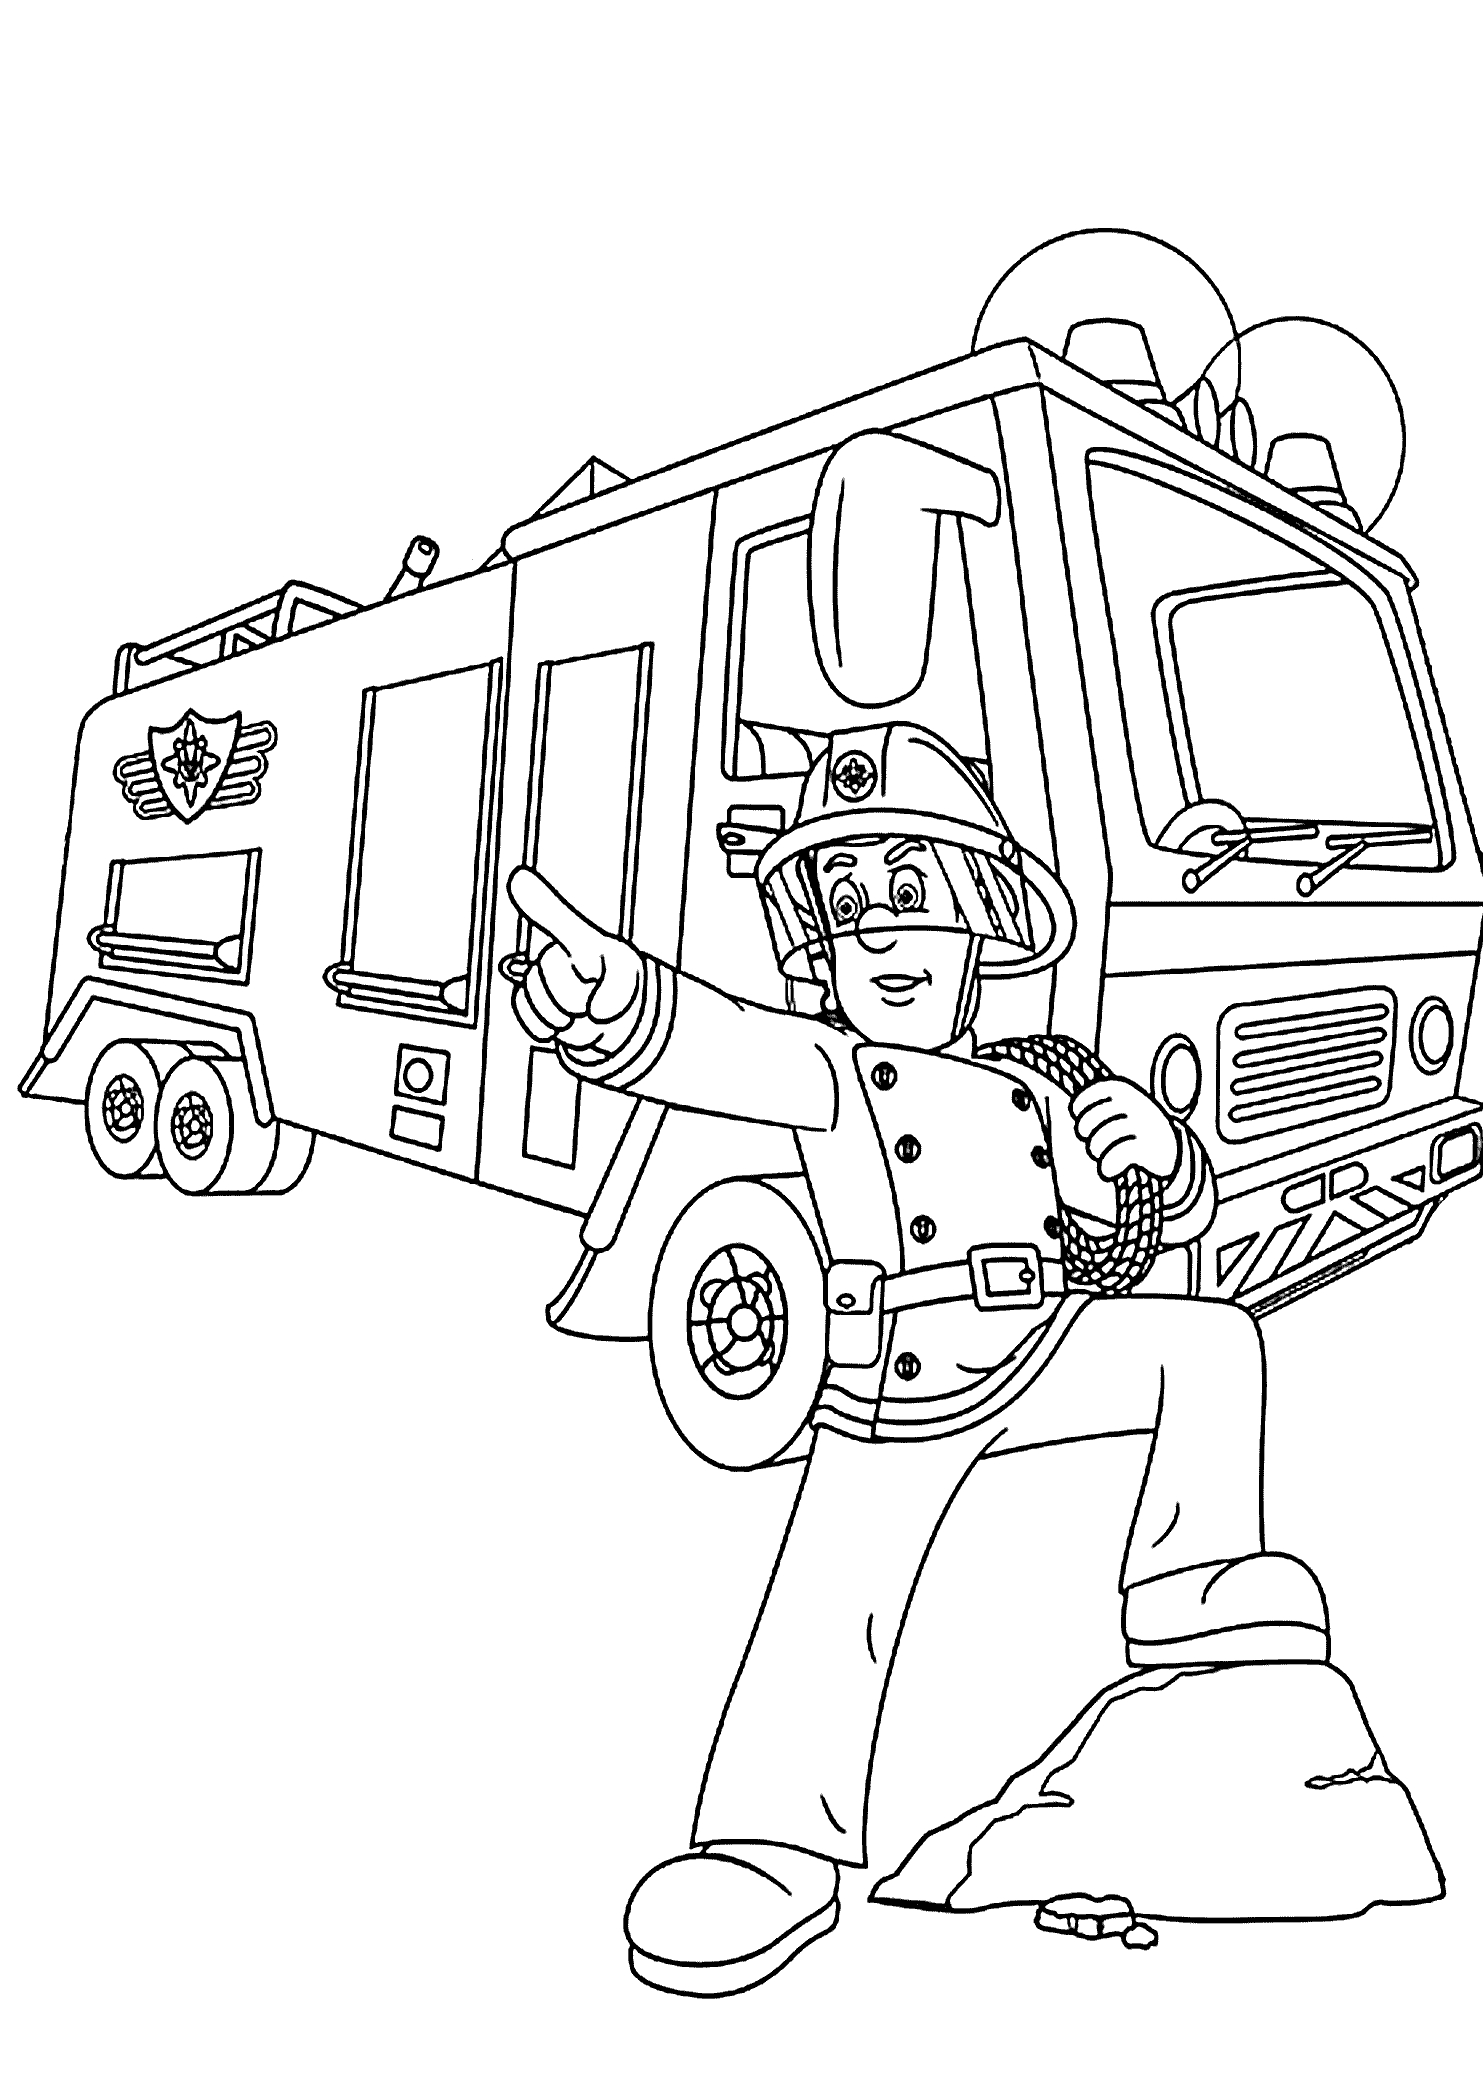 Fireman sam coloring pages to download and print for free